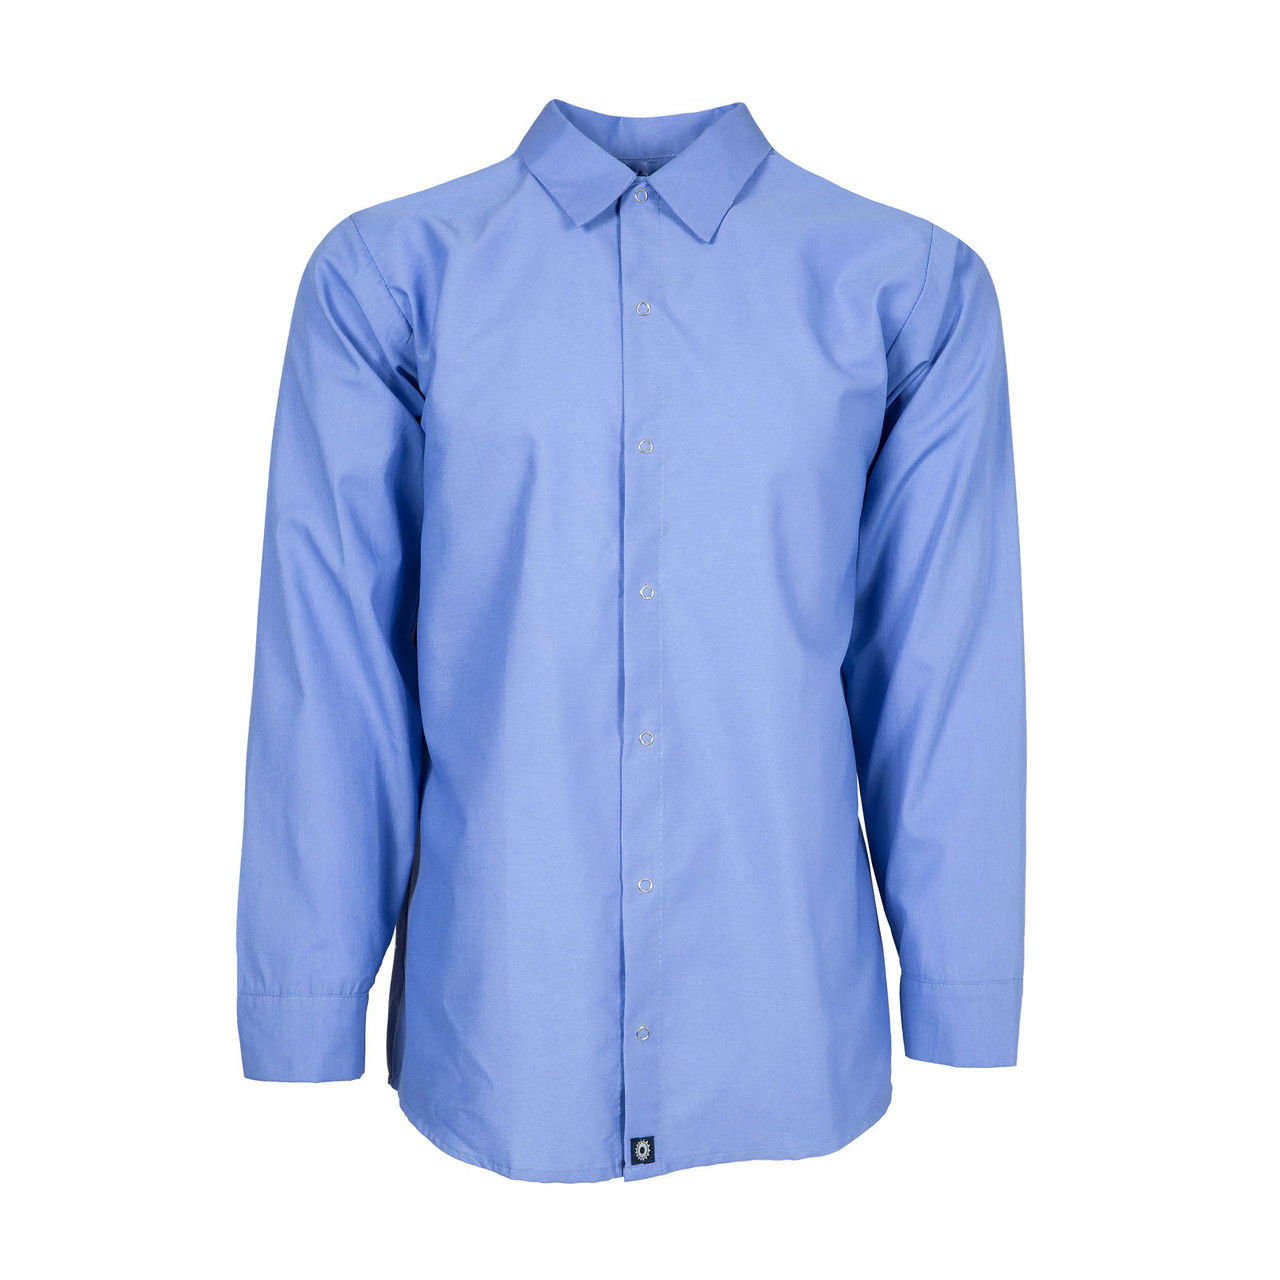 From where are the blue work shirt womens, specifically the Gulf Blue, shipped?